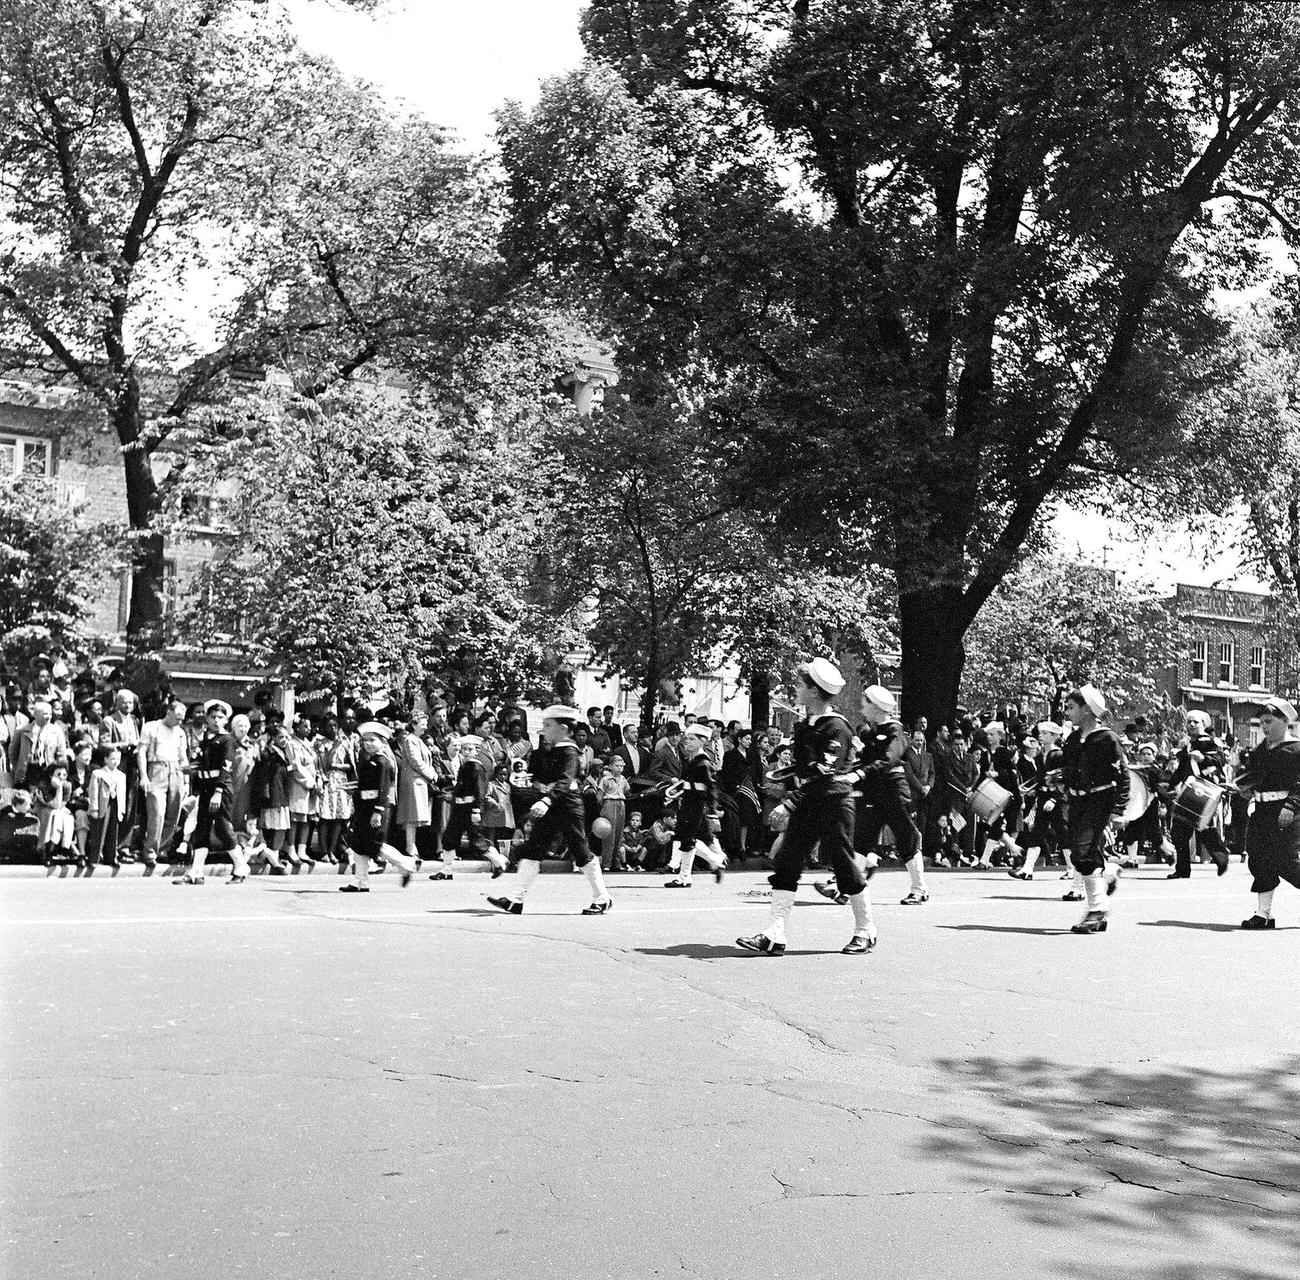 Little Boys In Uniforms Marching In Brooklyn Parade, 1948